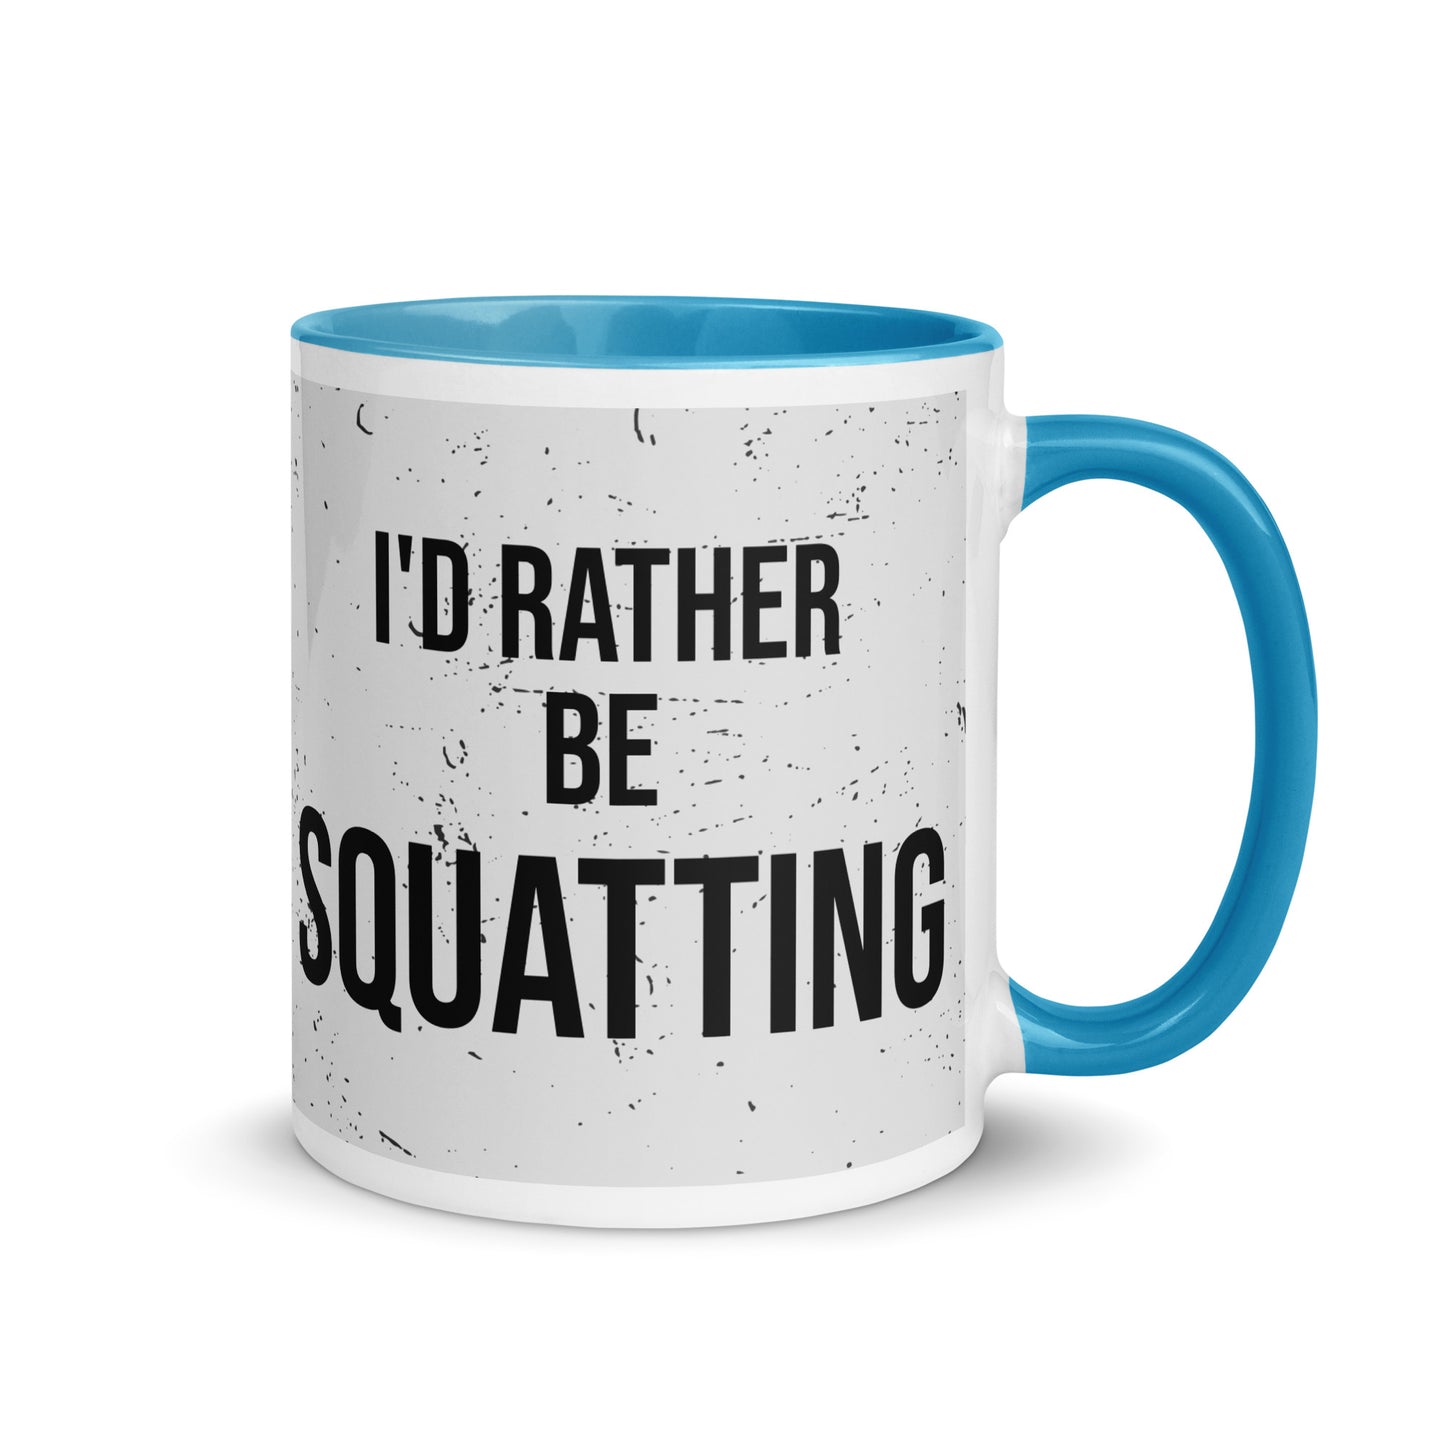 Blue handled mug with I'd rather be squatting written on it, across a grey splatter background. A gift for someone who loves the gym.